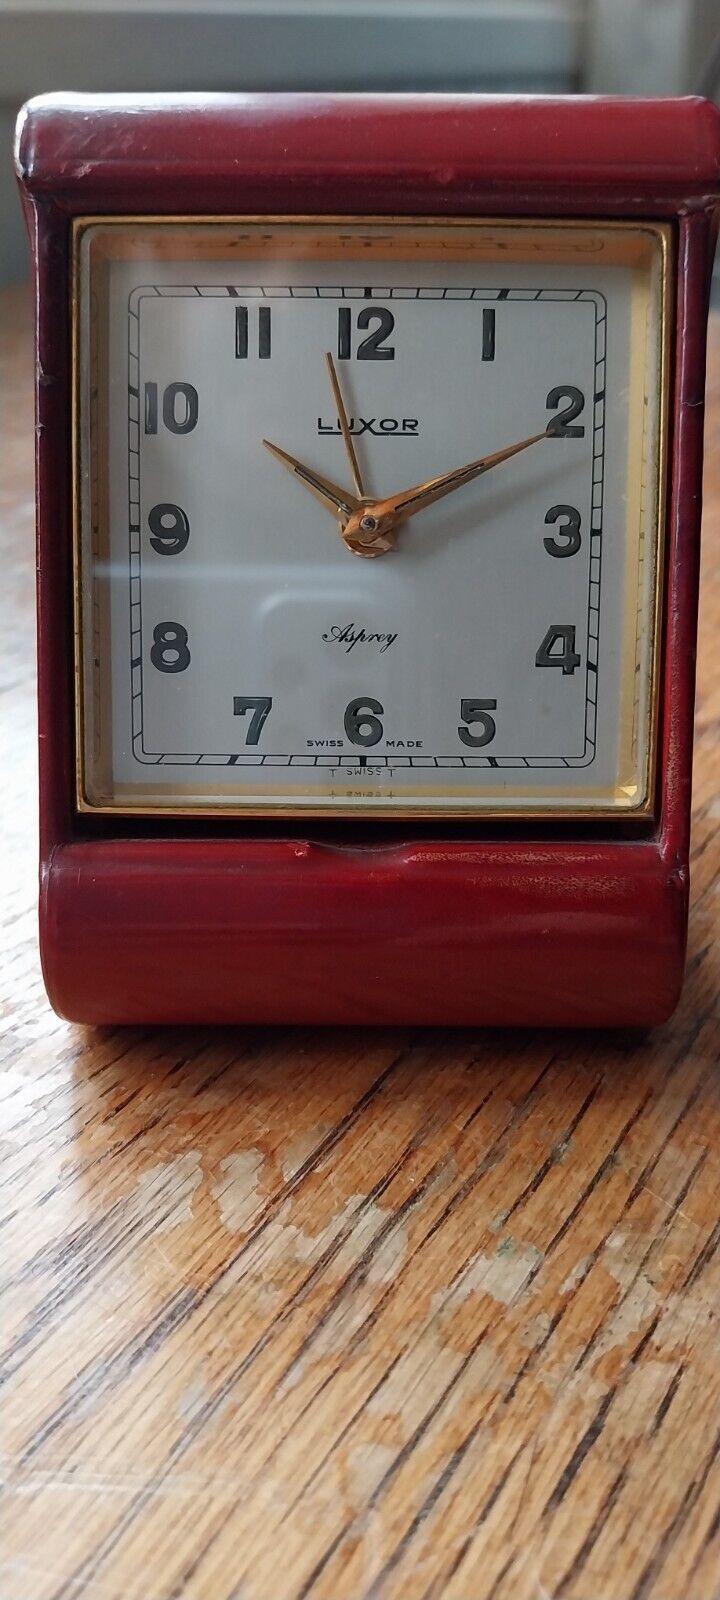 Luxor 8-day ByAsprey Folding Alarm Clock IN Need Of Some Attention GoodCONDITION